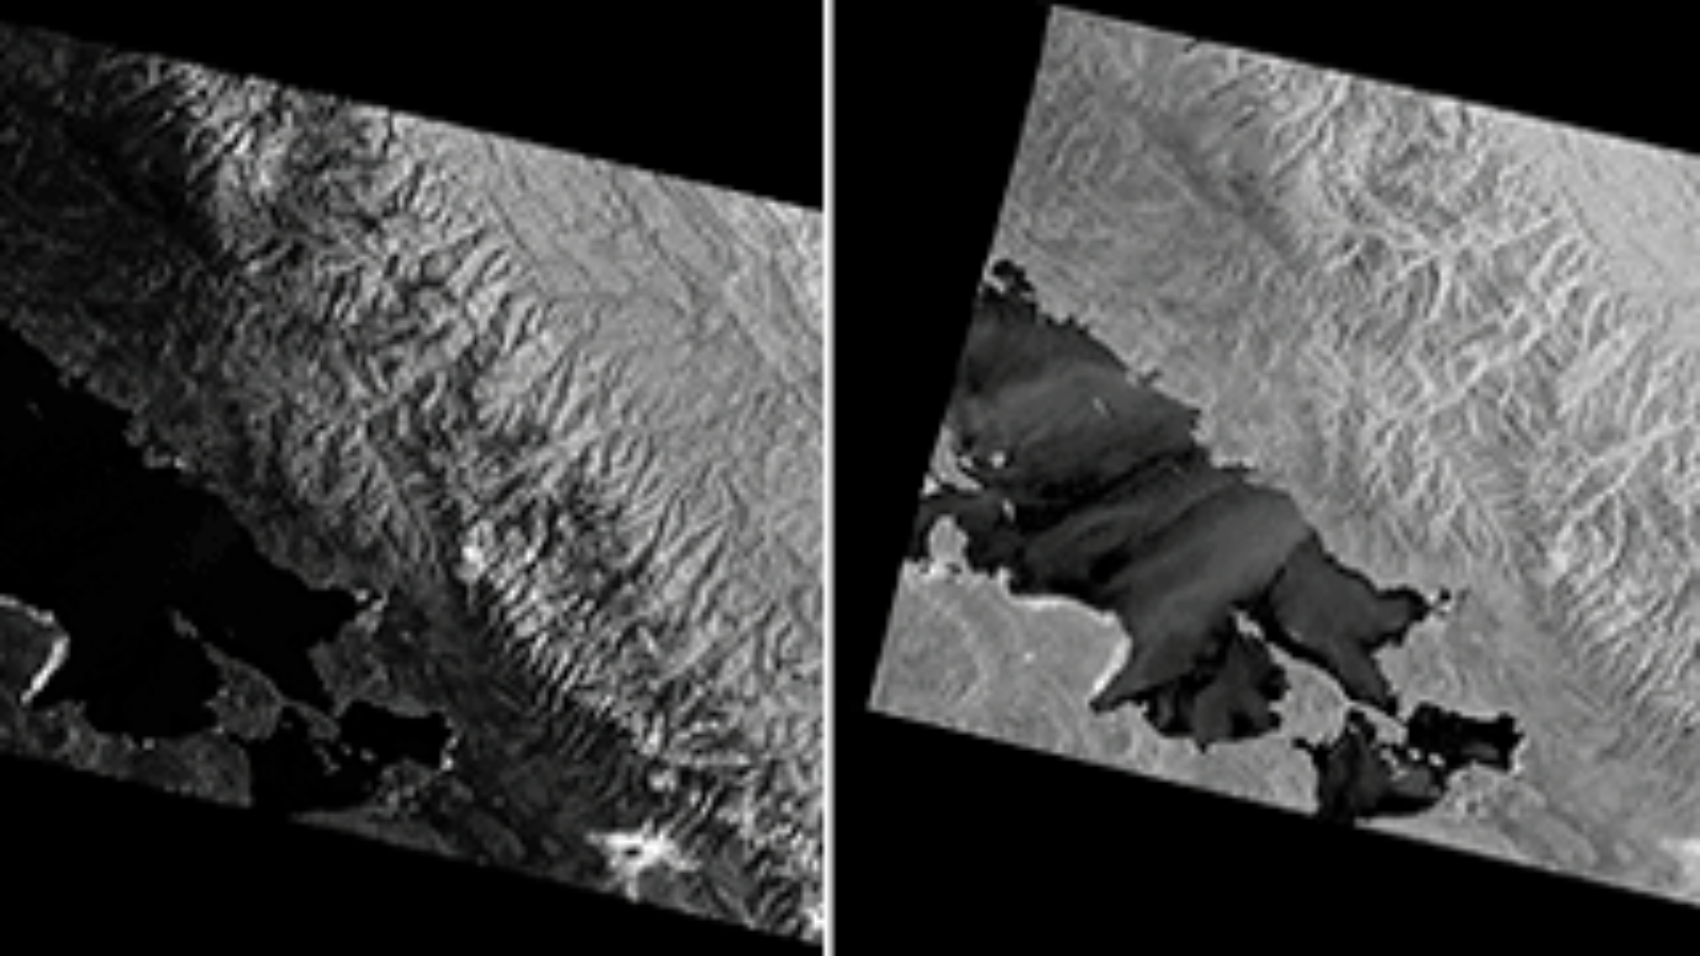 Before and after RTC: In this detail from the test granule, mountains spanning the Peru-Bolivia border appear stretched on one side and compressed on the other (left). RTC (right) moves pixels to unstretch the mountains and adjusts pixel values to subtract the effect of slopes on brightness. Credit left: Copernicus Sentinel data 2015. Credit right: ASF DAAC 2016, contains modified Copernicus Sentinel data 2015, processed by ESA.